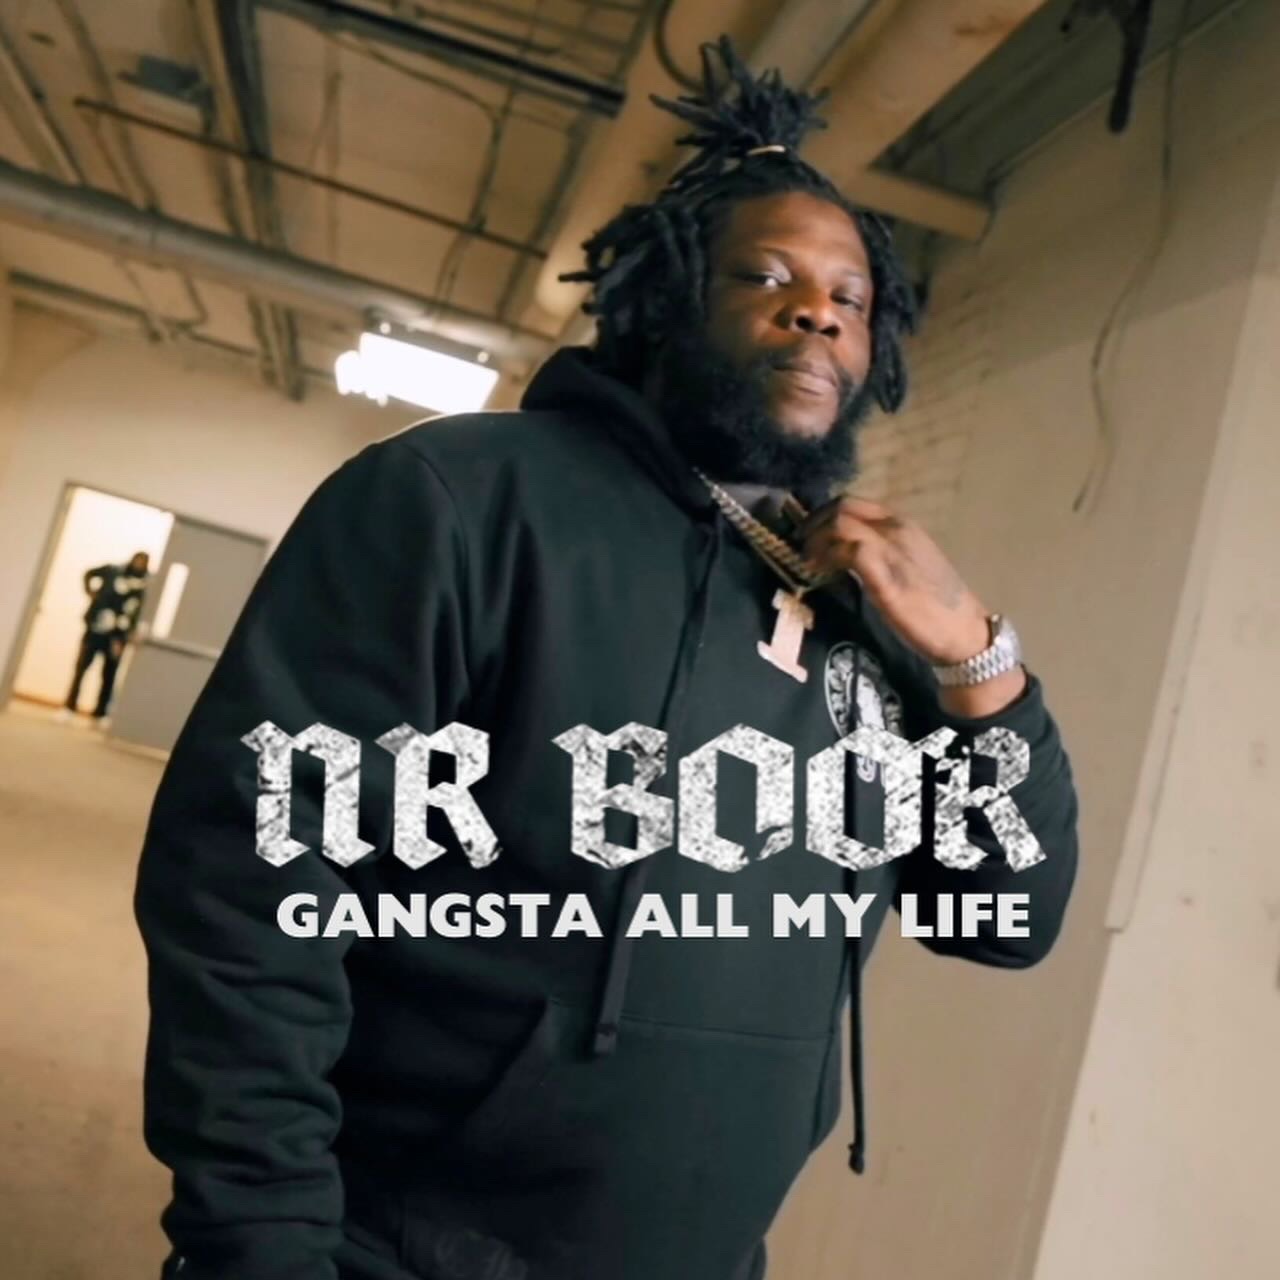 NR BOOR “Gangsta All My Life” OUT NOW!